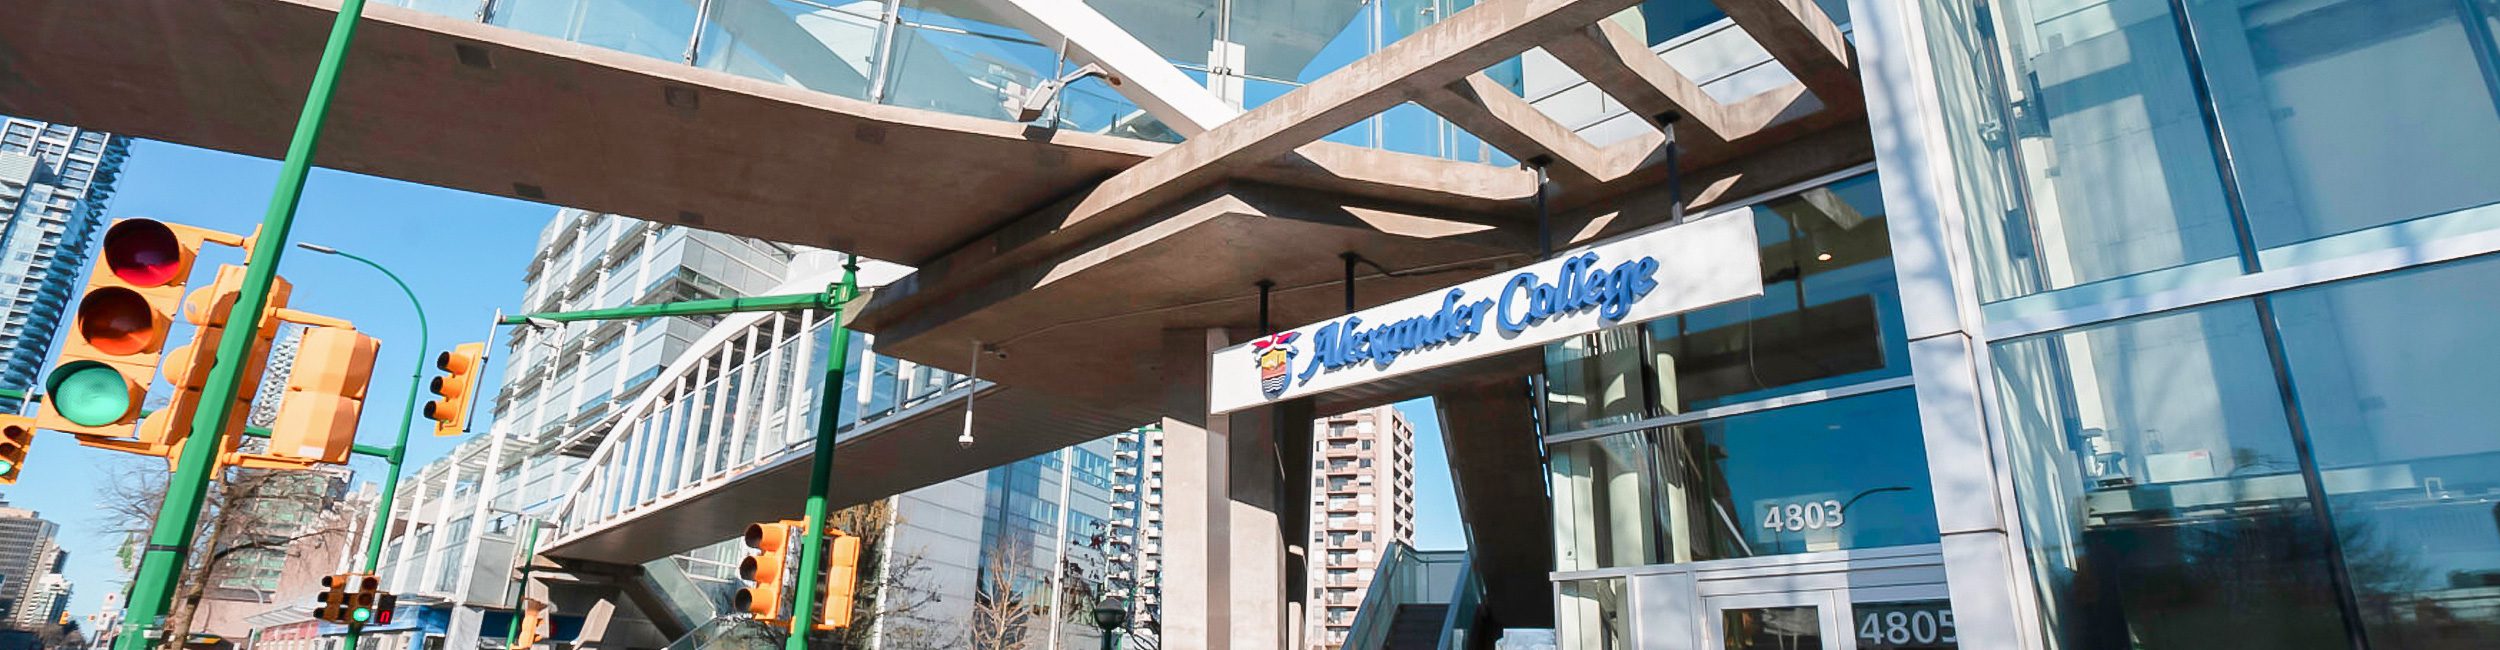 The Alexander College sign above the main entrance of Burnaby campus